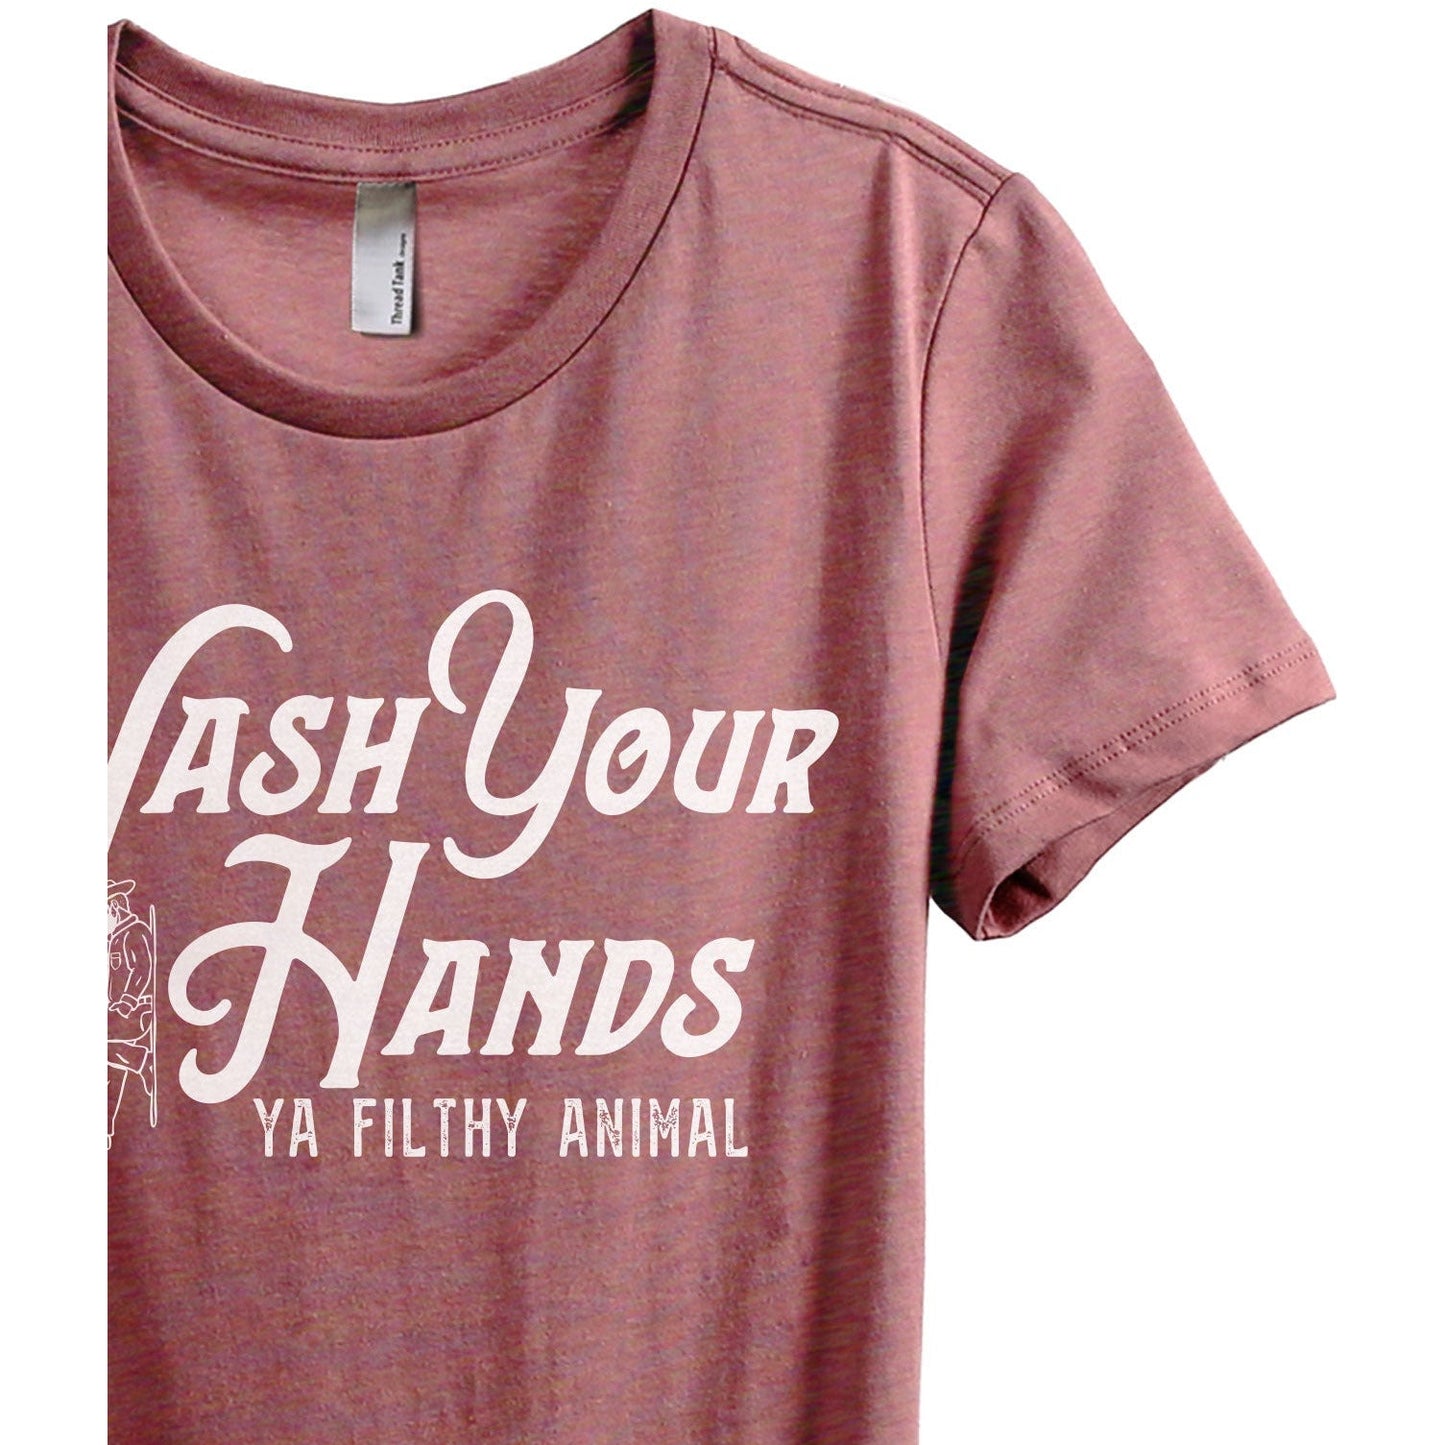 Wash Your Hands Ya Filthy Animal - Stories You Can Wear